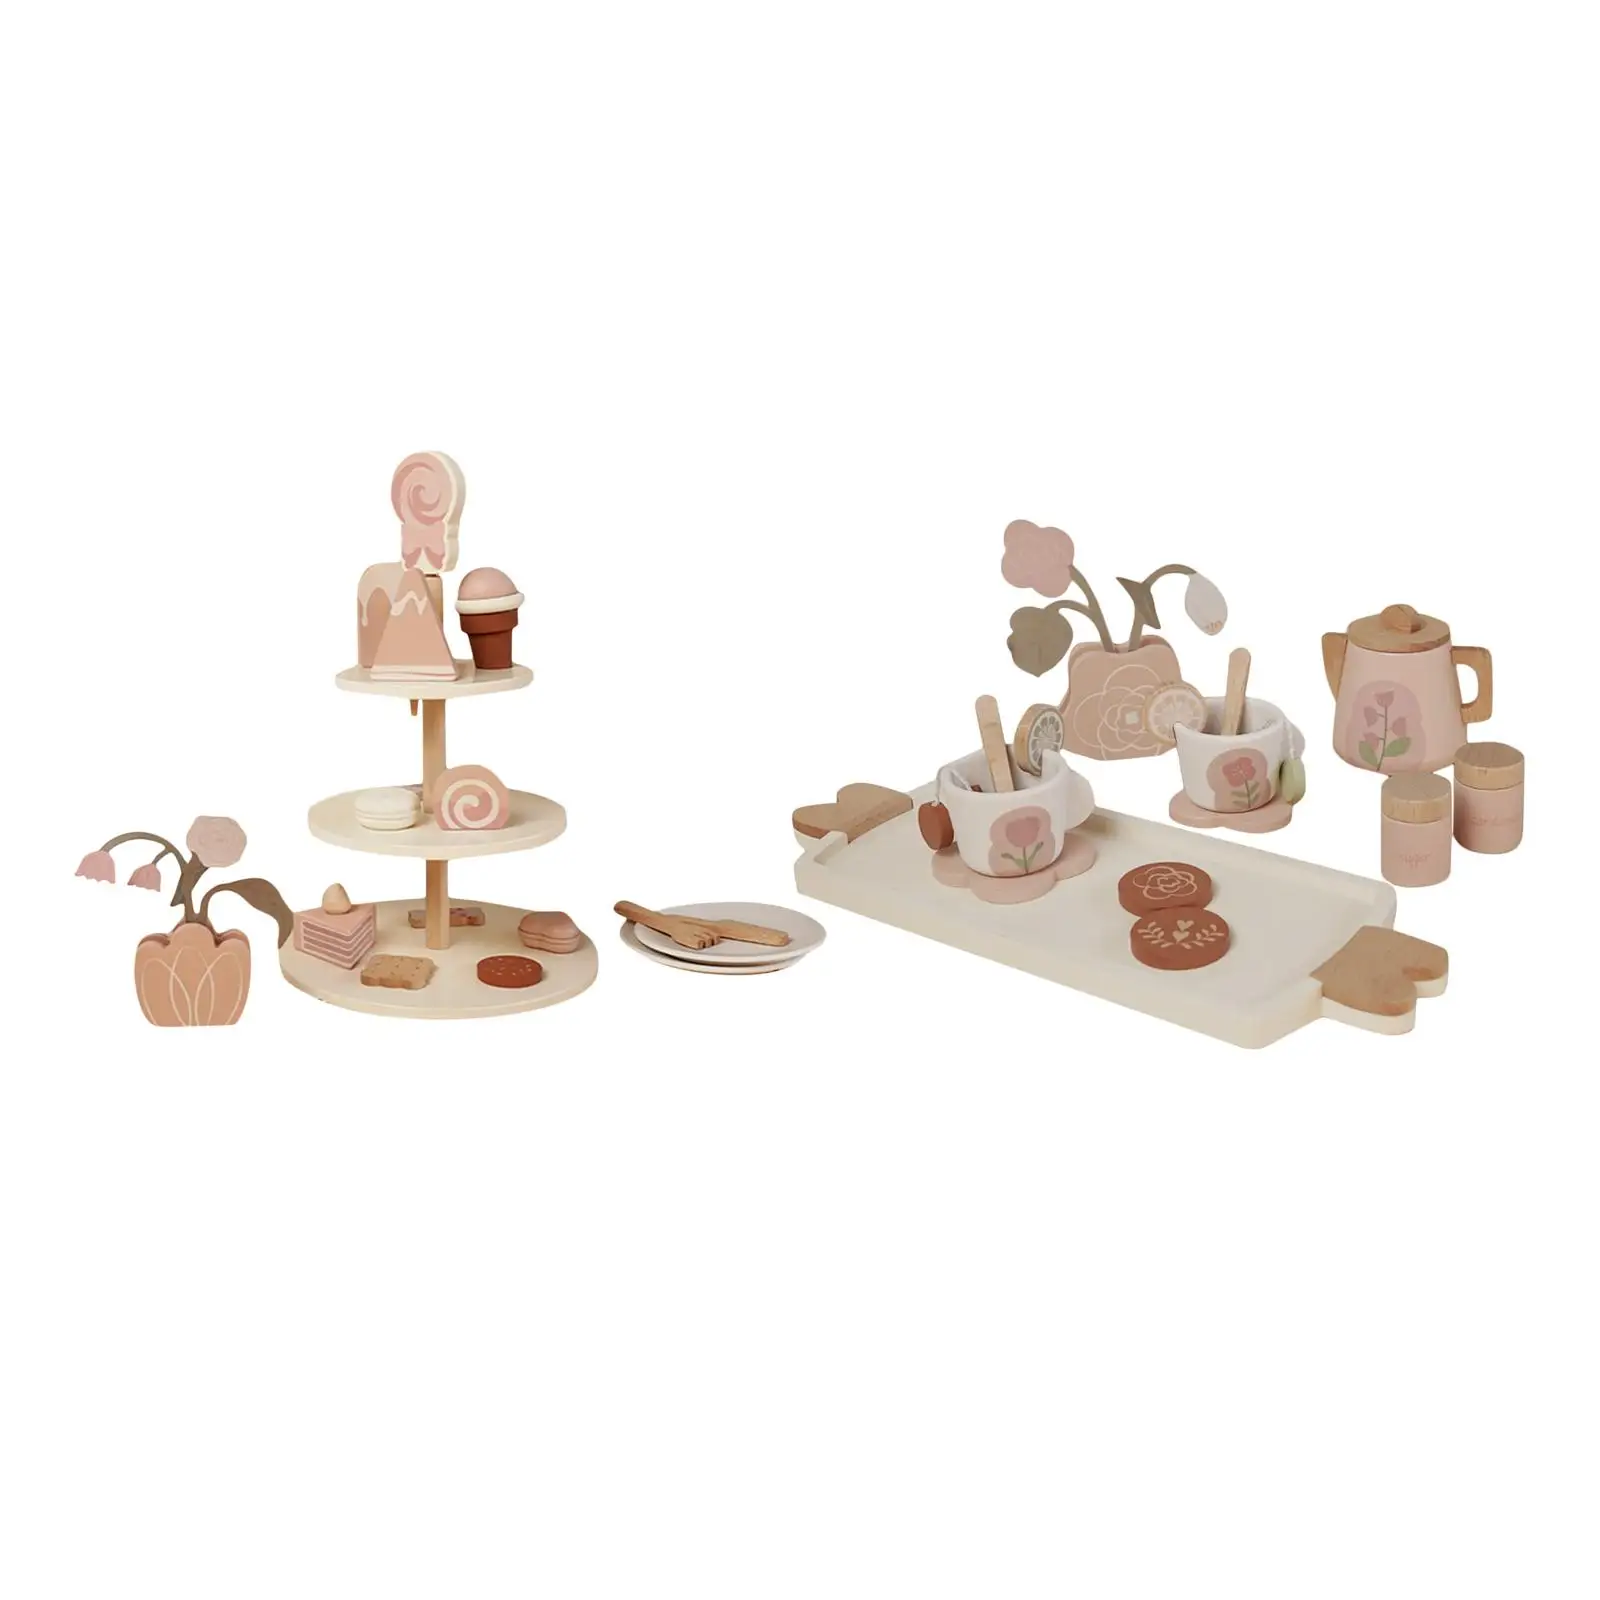 Simulated Afternoon Tea Set Toy Mini Toys Little Girls Tea Party Set for Toddlers Girls